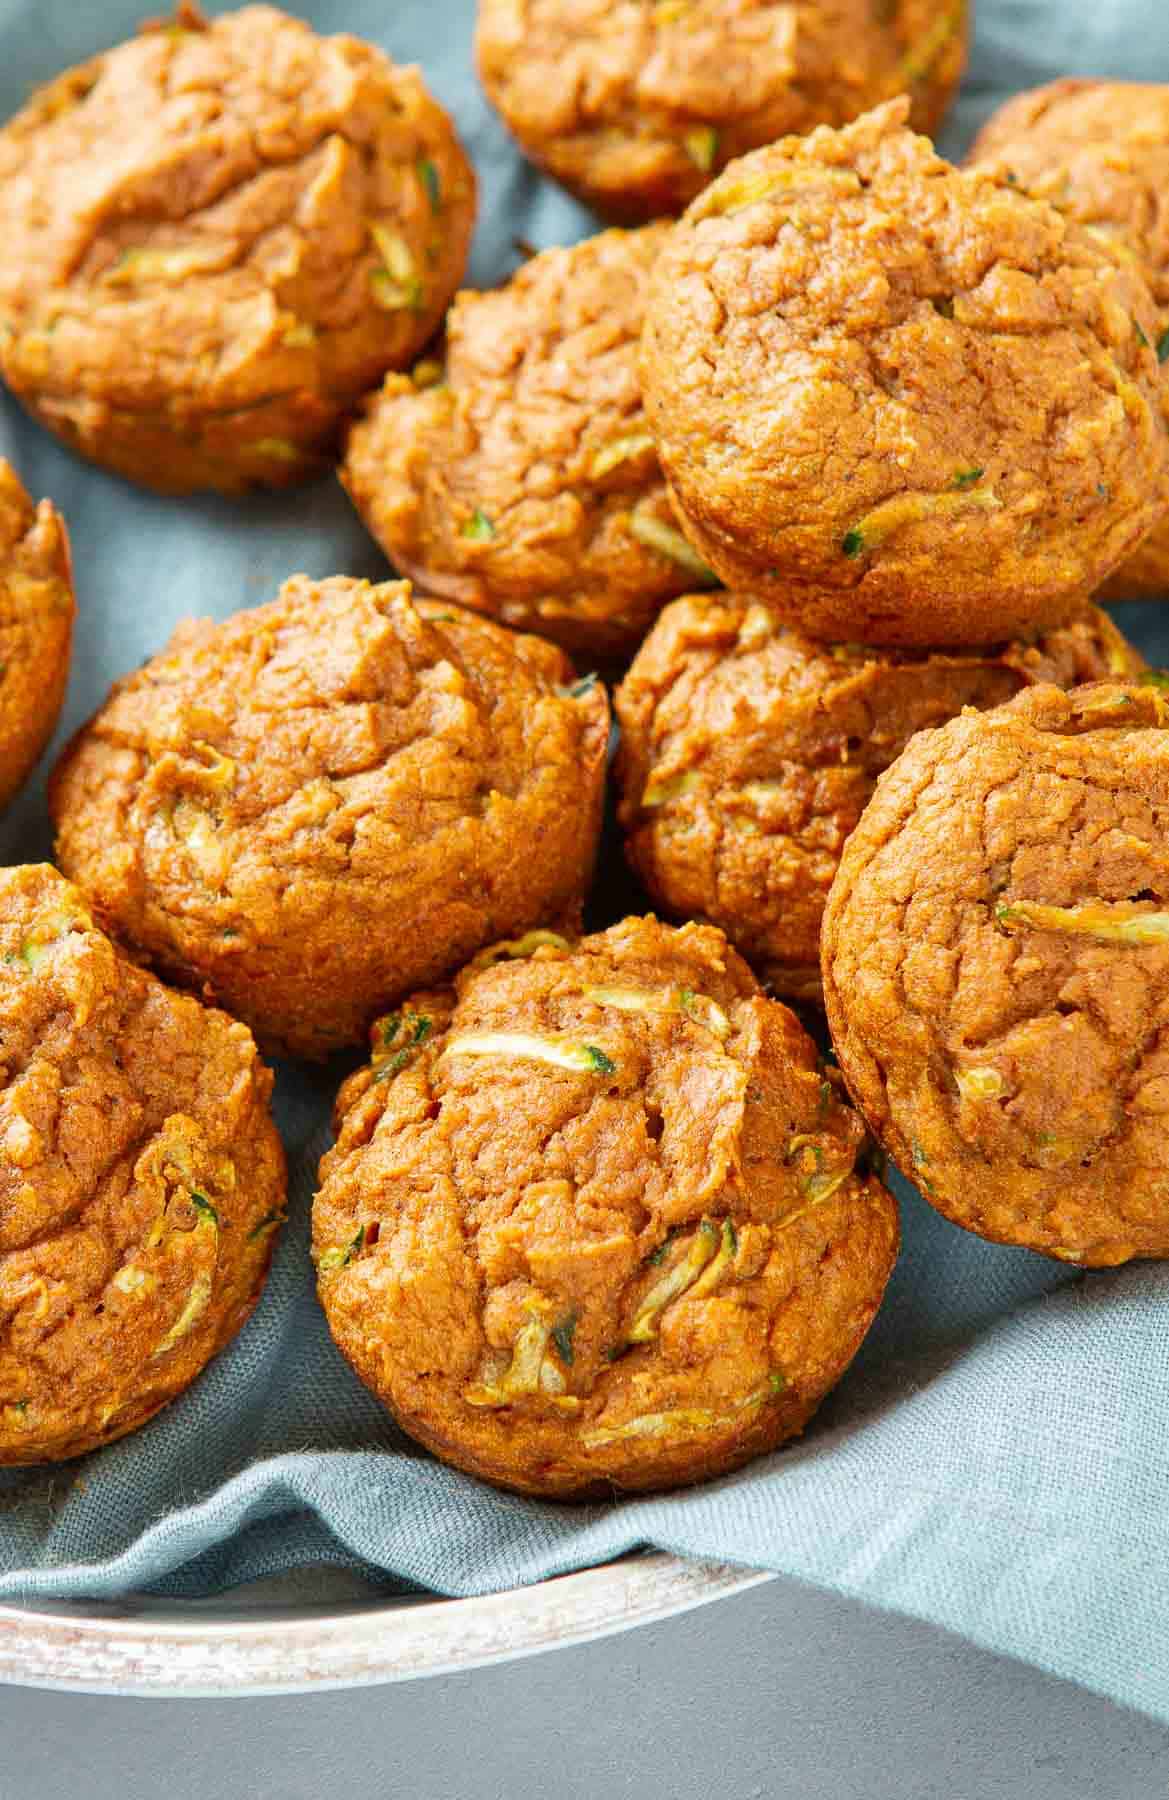 Keep these Pumpkin Zucchini Muffins on hand for healthy snacks or quick breakfasts. Easy to make and full of autumn spices. | Healthy | Recipes | Healthy kids | Easy | With applesauce